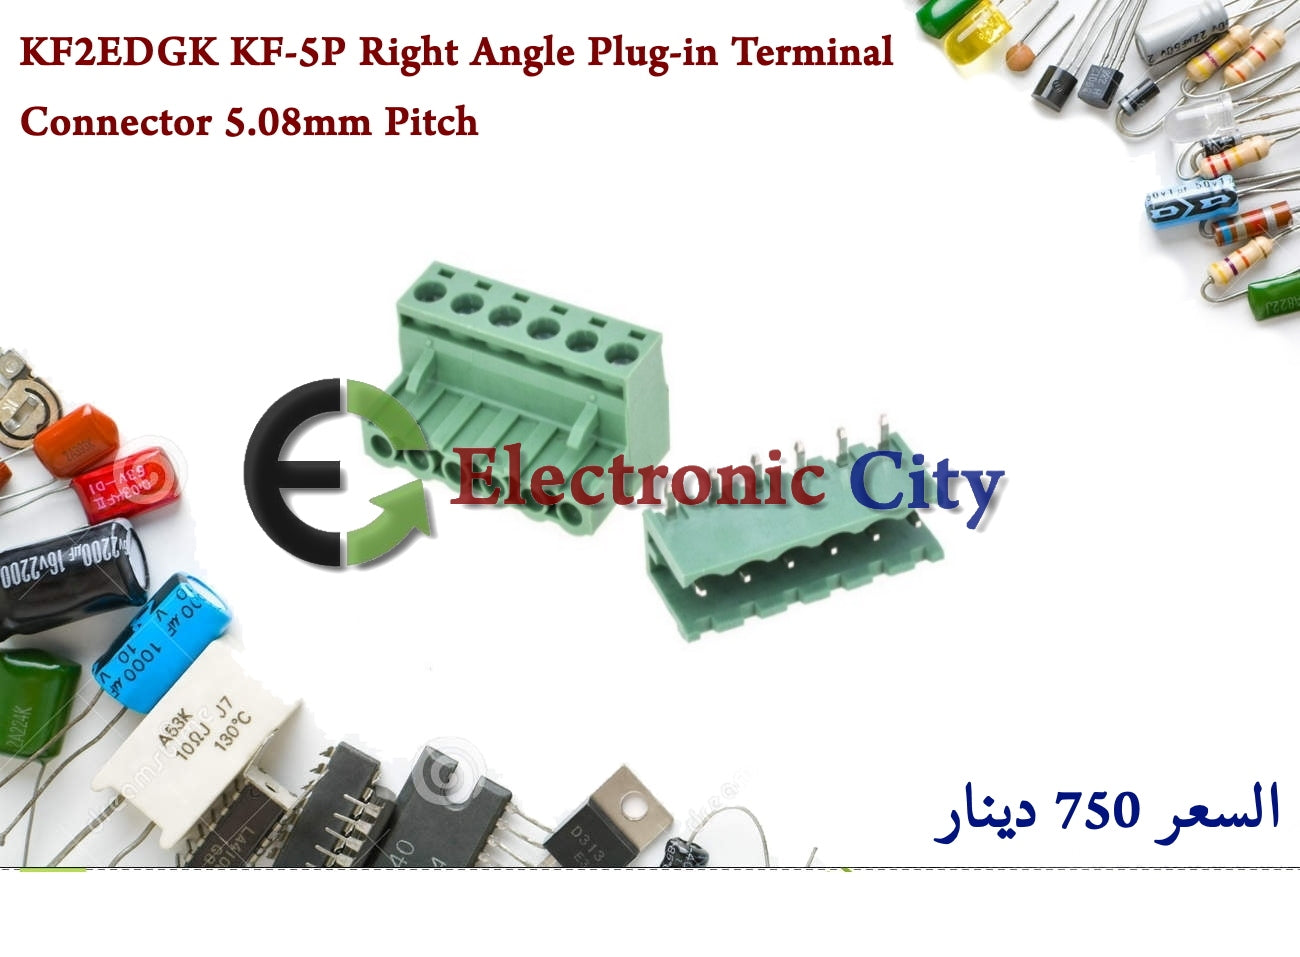 KF2EDGK KF-5P Right Angle Plug-in Terminal Connector 5.08mm Pitch